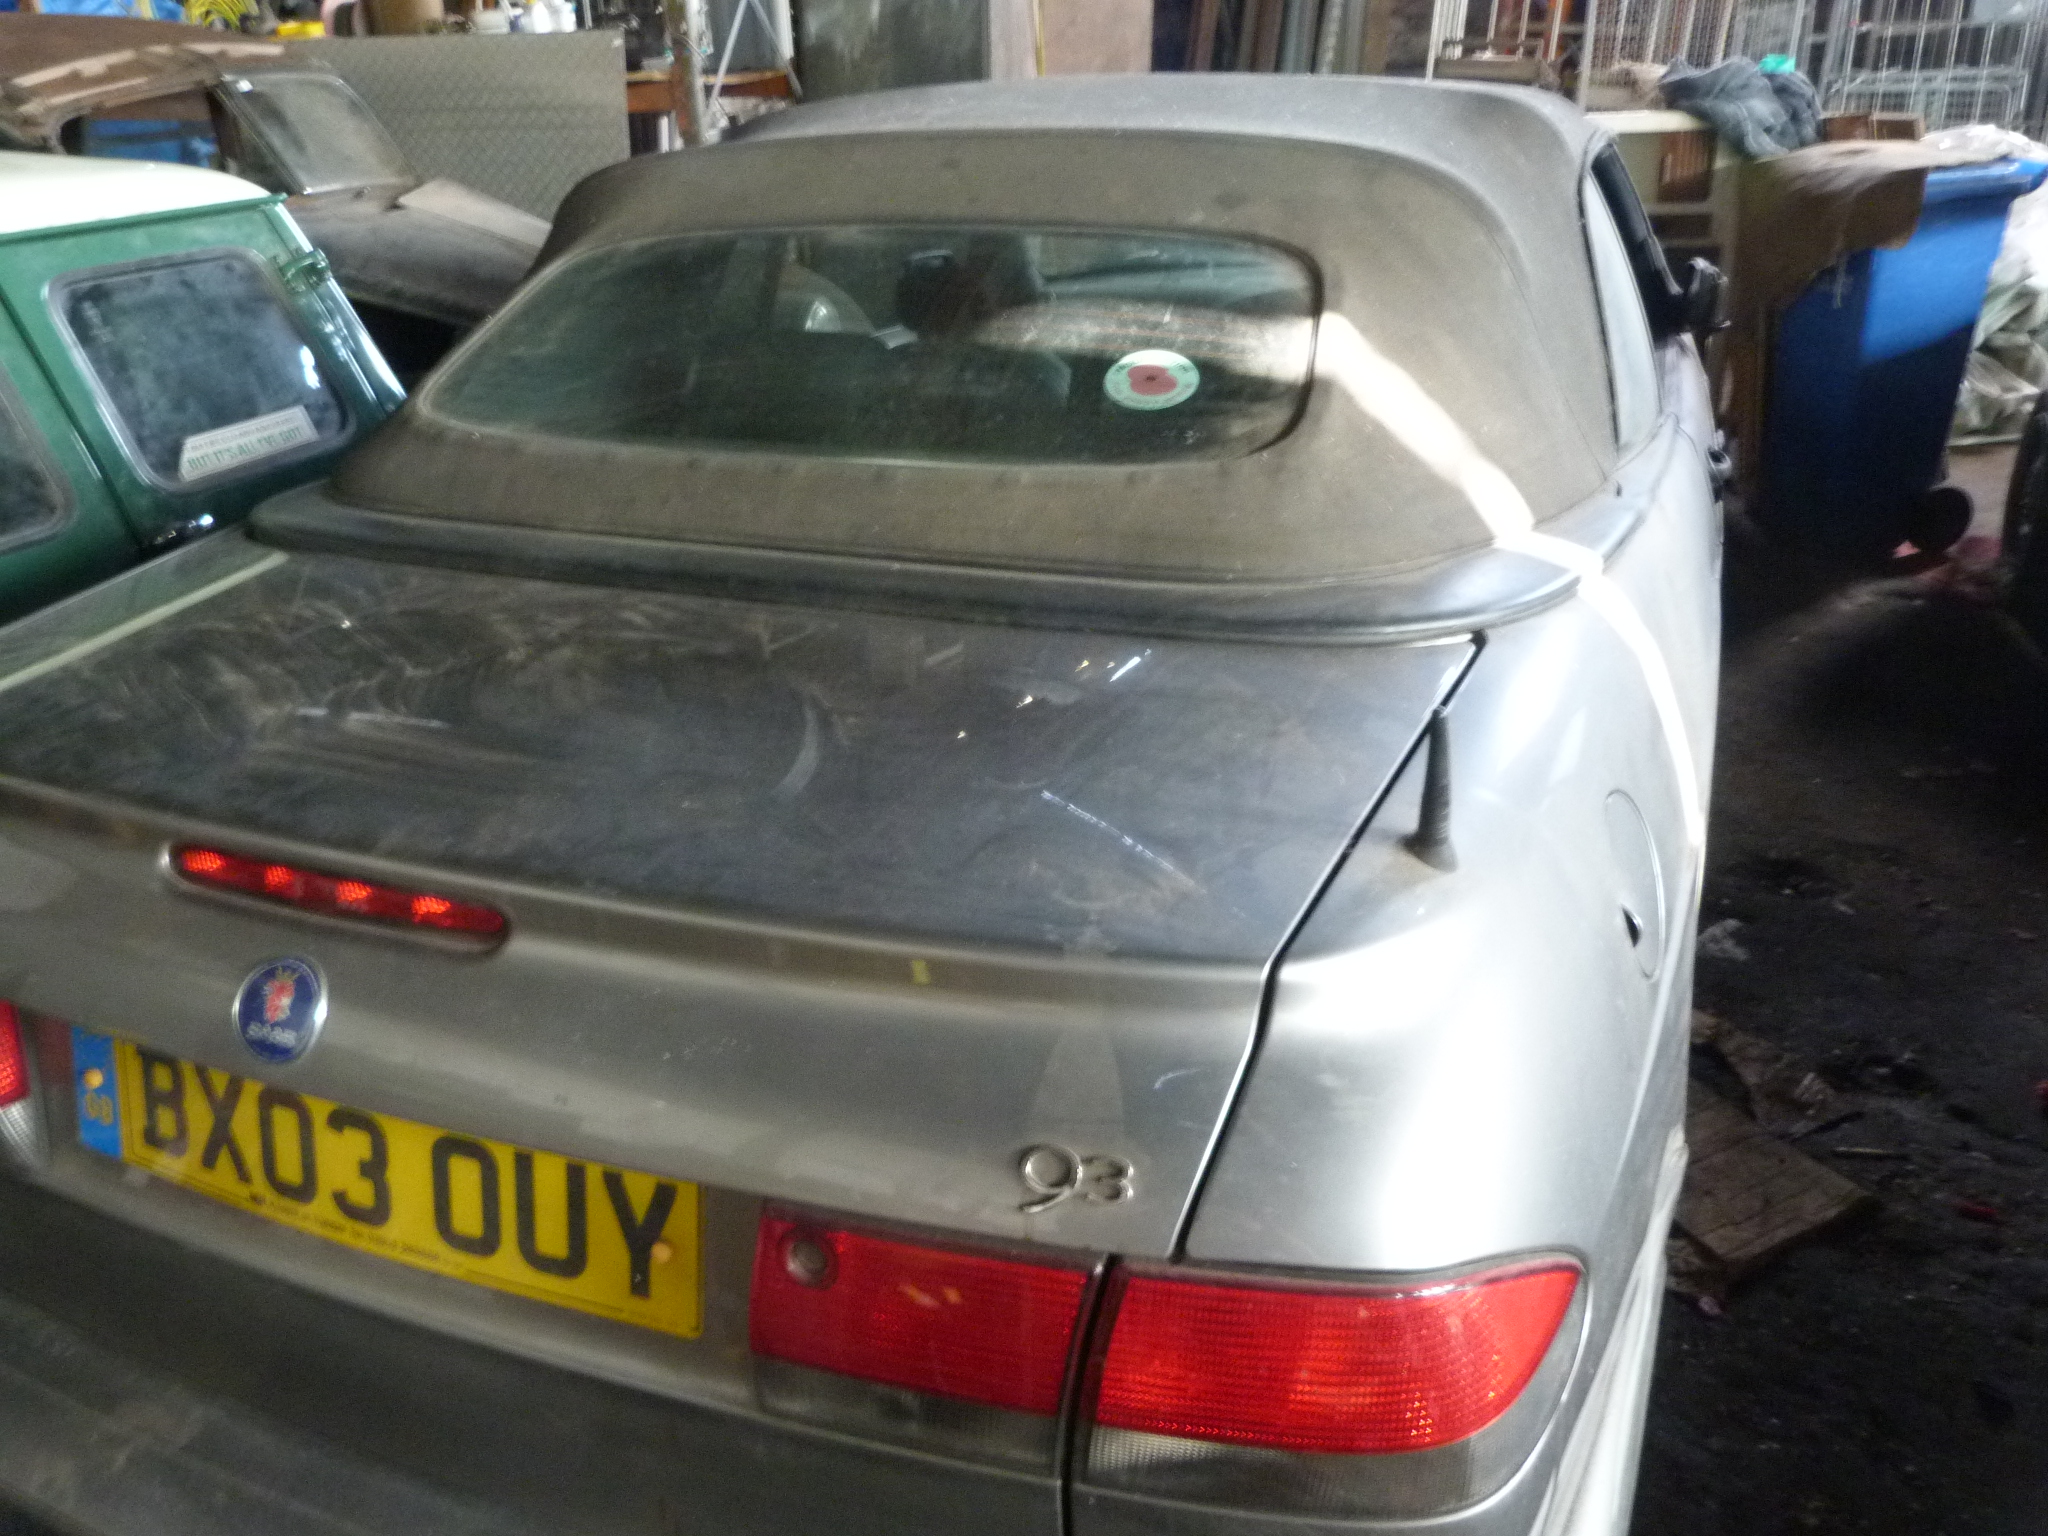 Saab 93 Convertible Mileage Approx 80,000 Full Saab Service History (Slight Offside Scrape on Wing) - Image 10 of 11